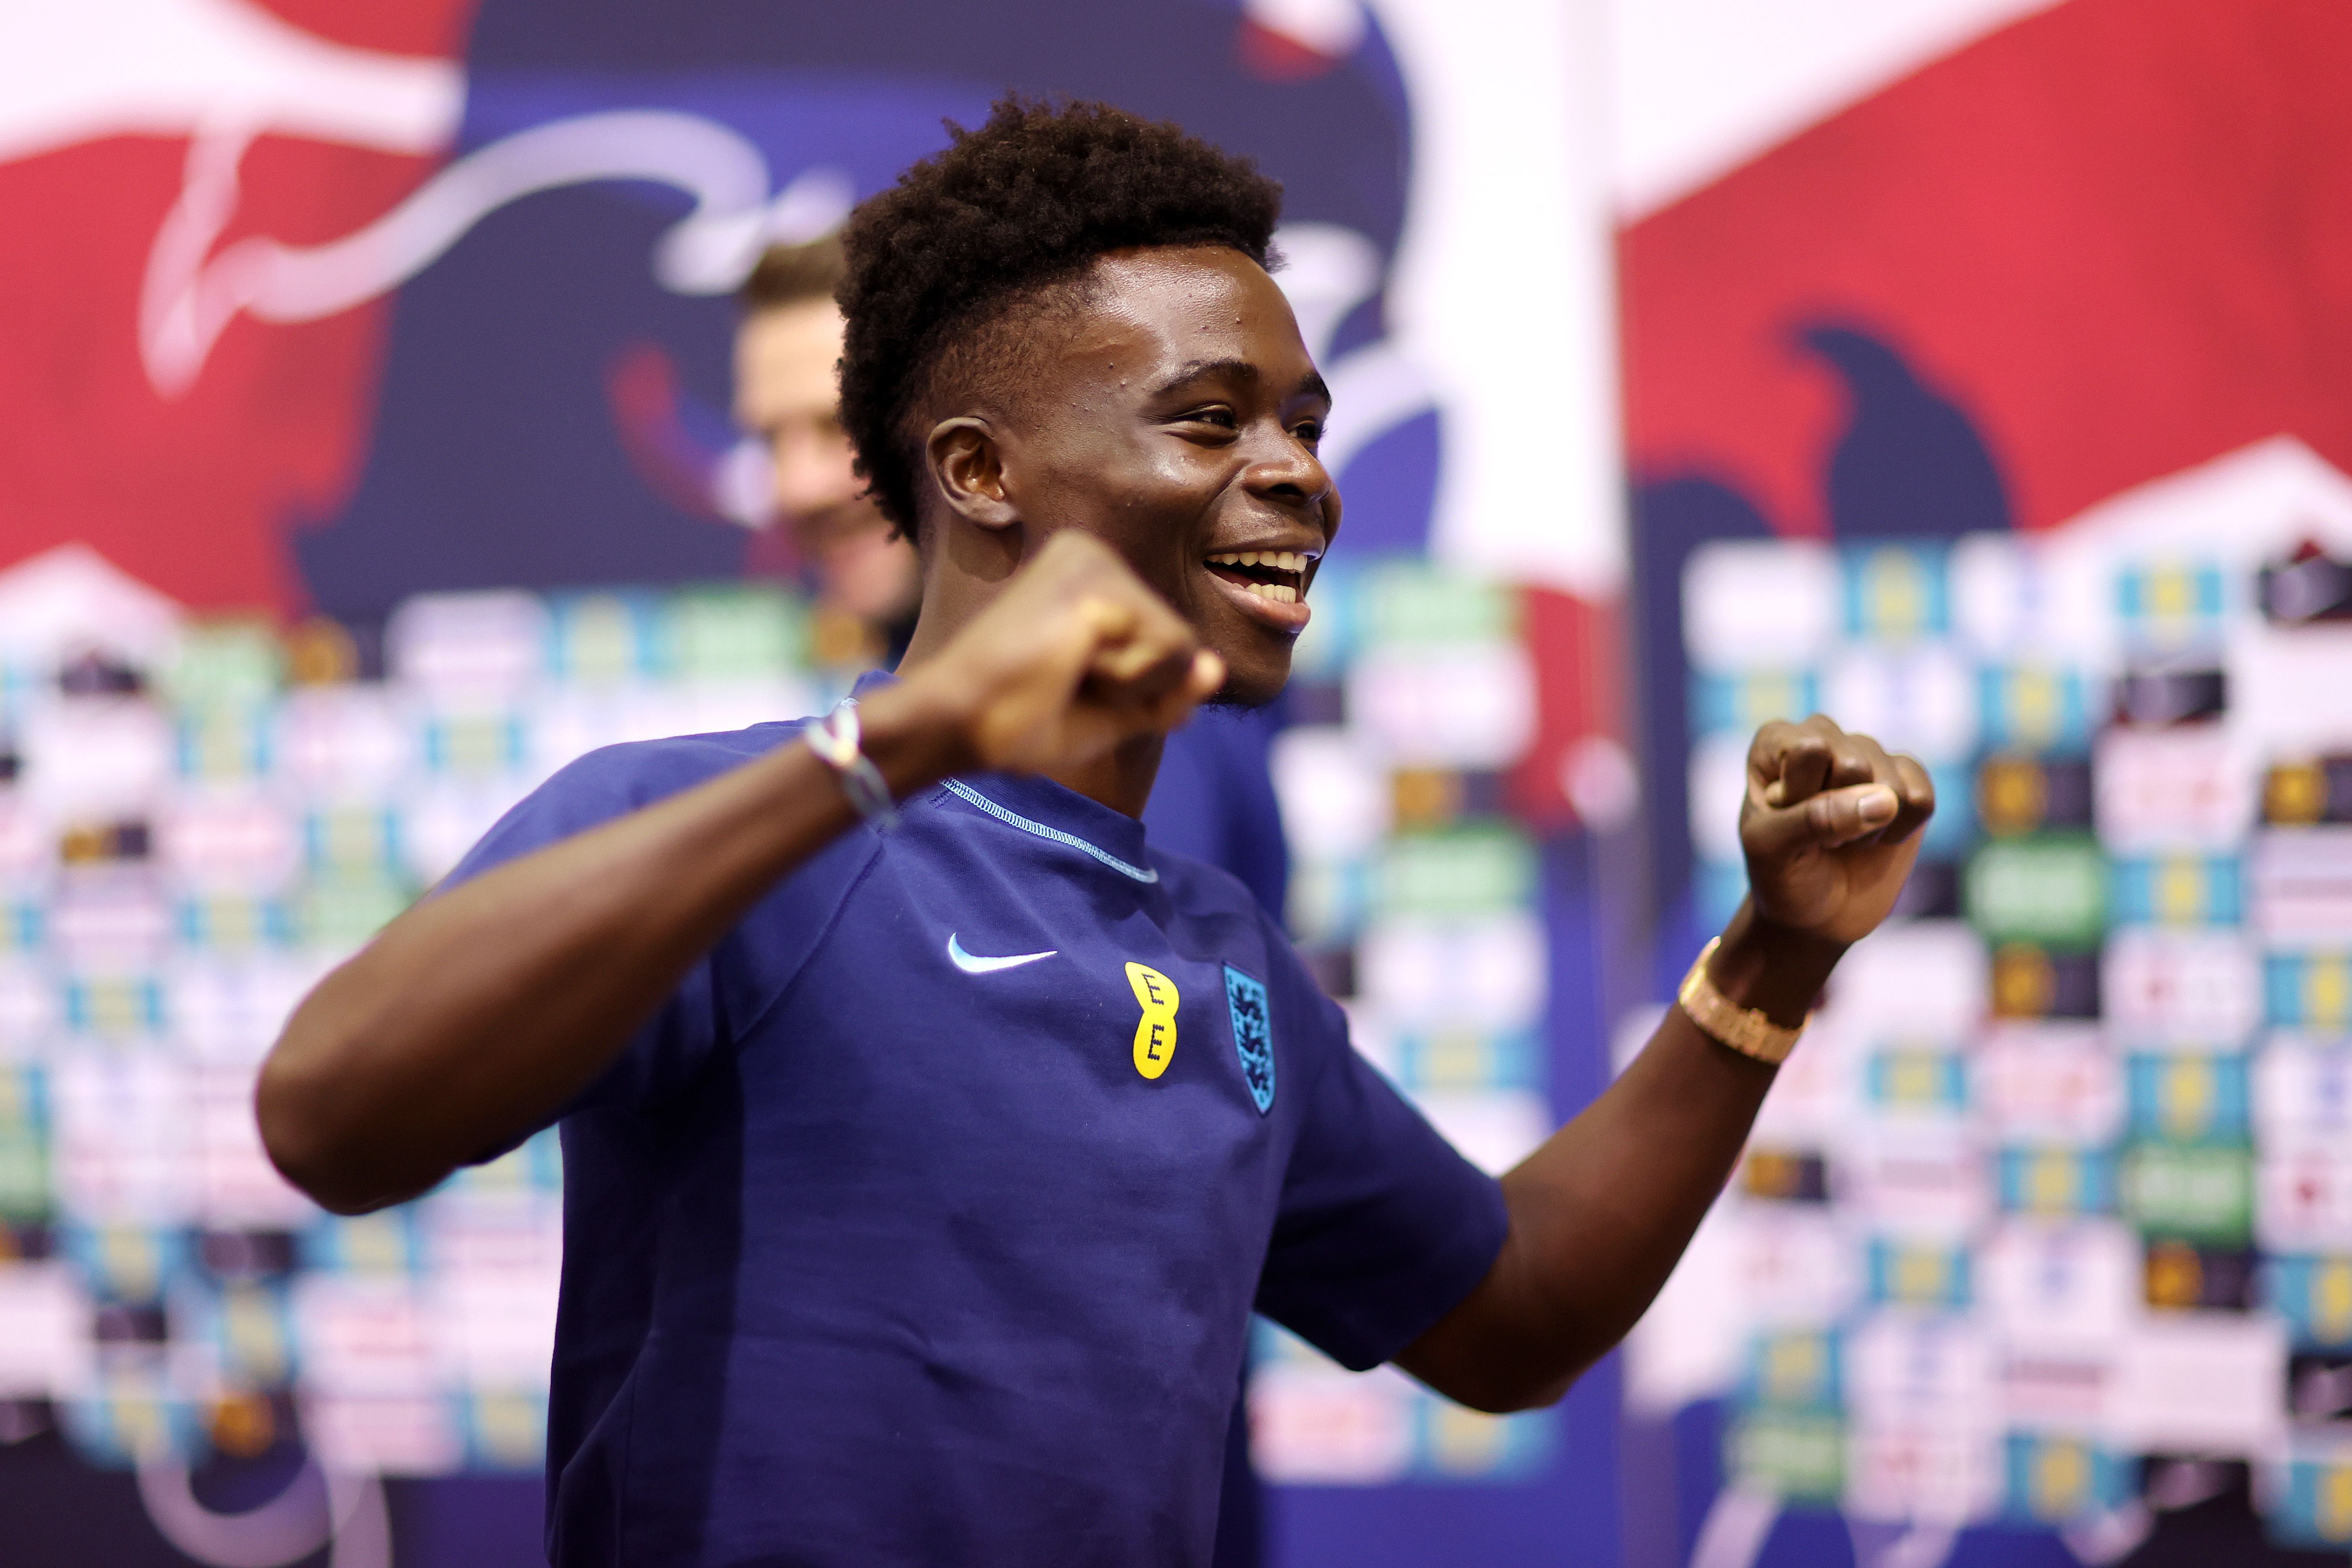 Bukayo Saka of England reacts after playing dartsduring the England Press Conference on the day after the Round of 16 match against Senegal at Al Wakrah Stadium on December 05, 2022 in Doha, Qatar